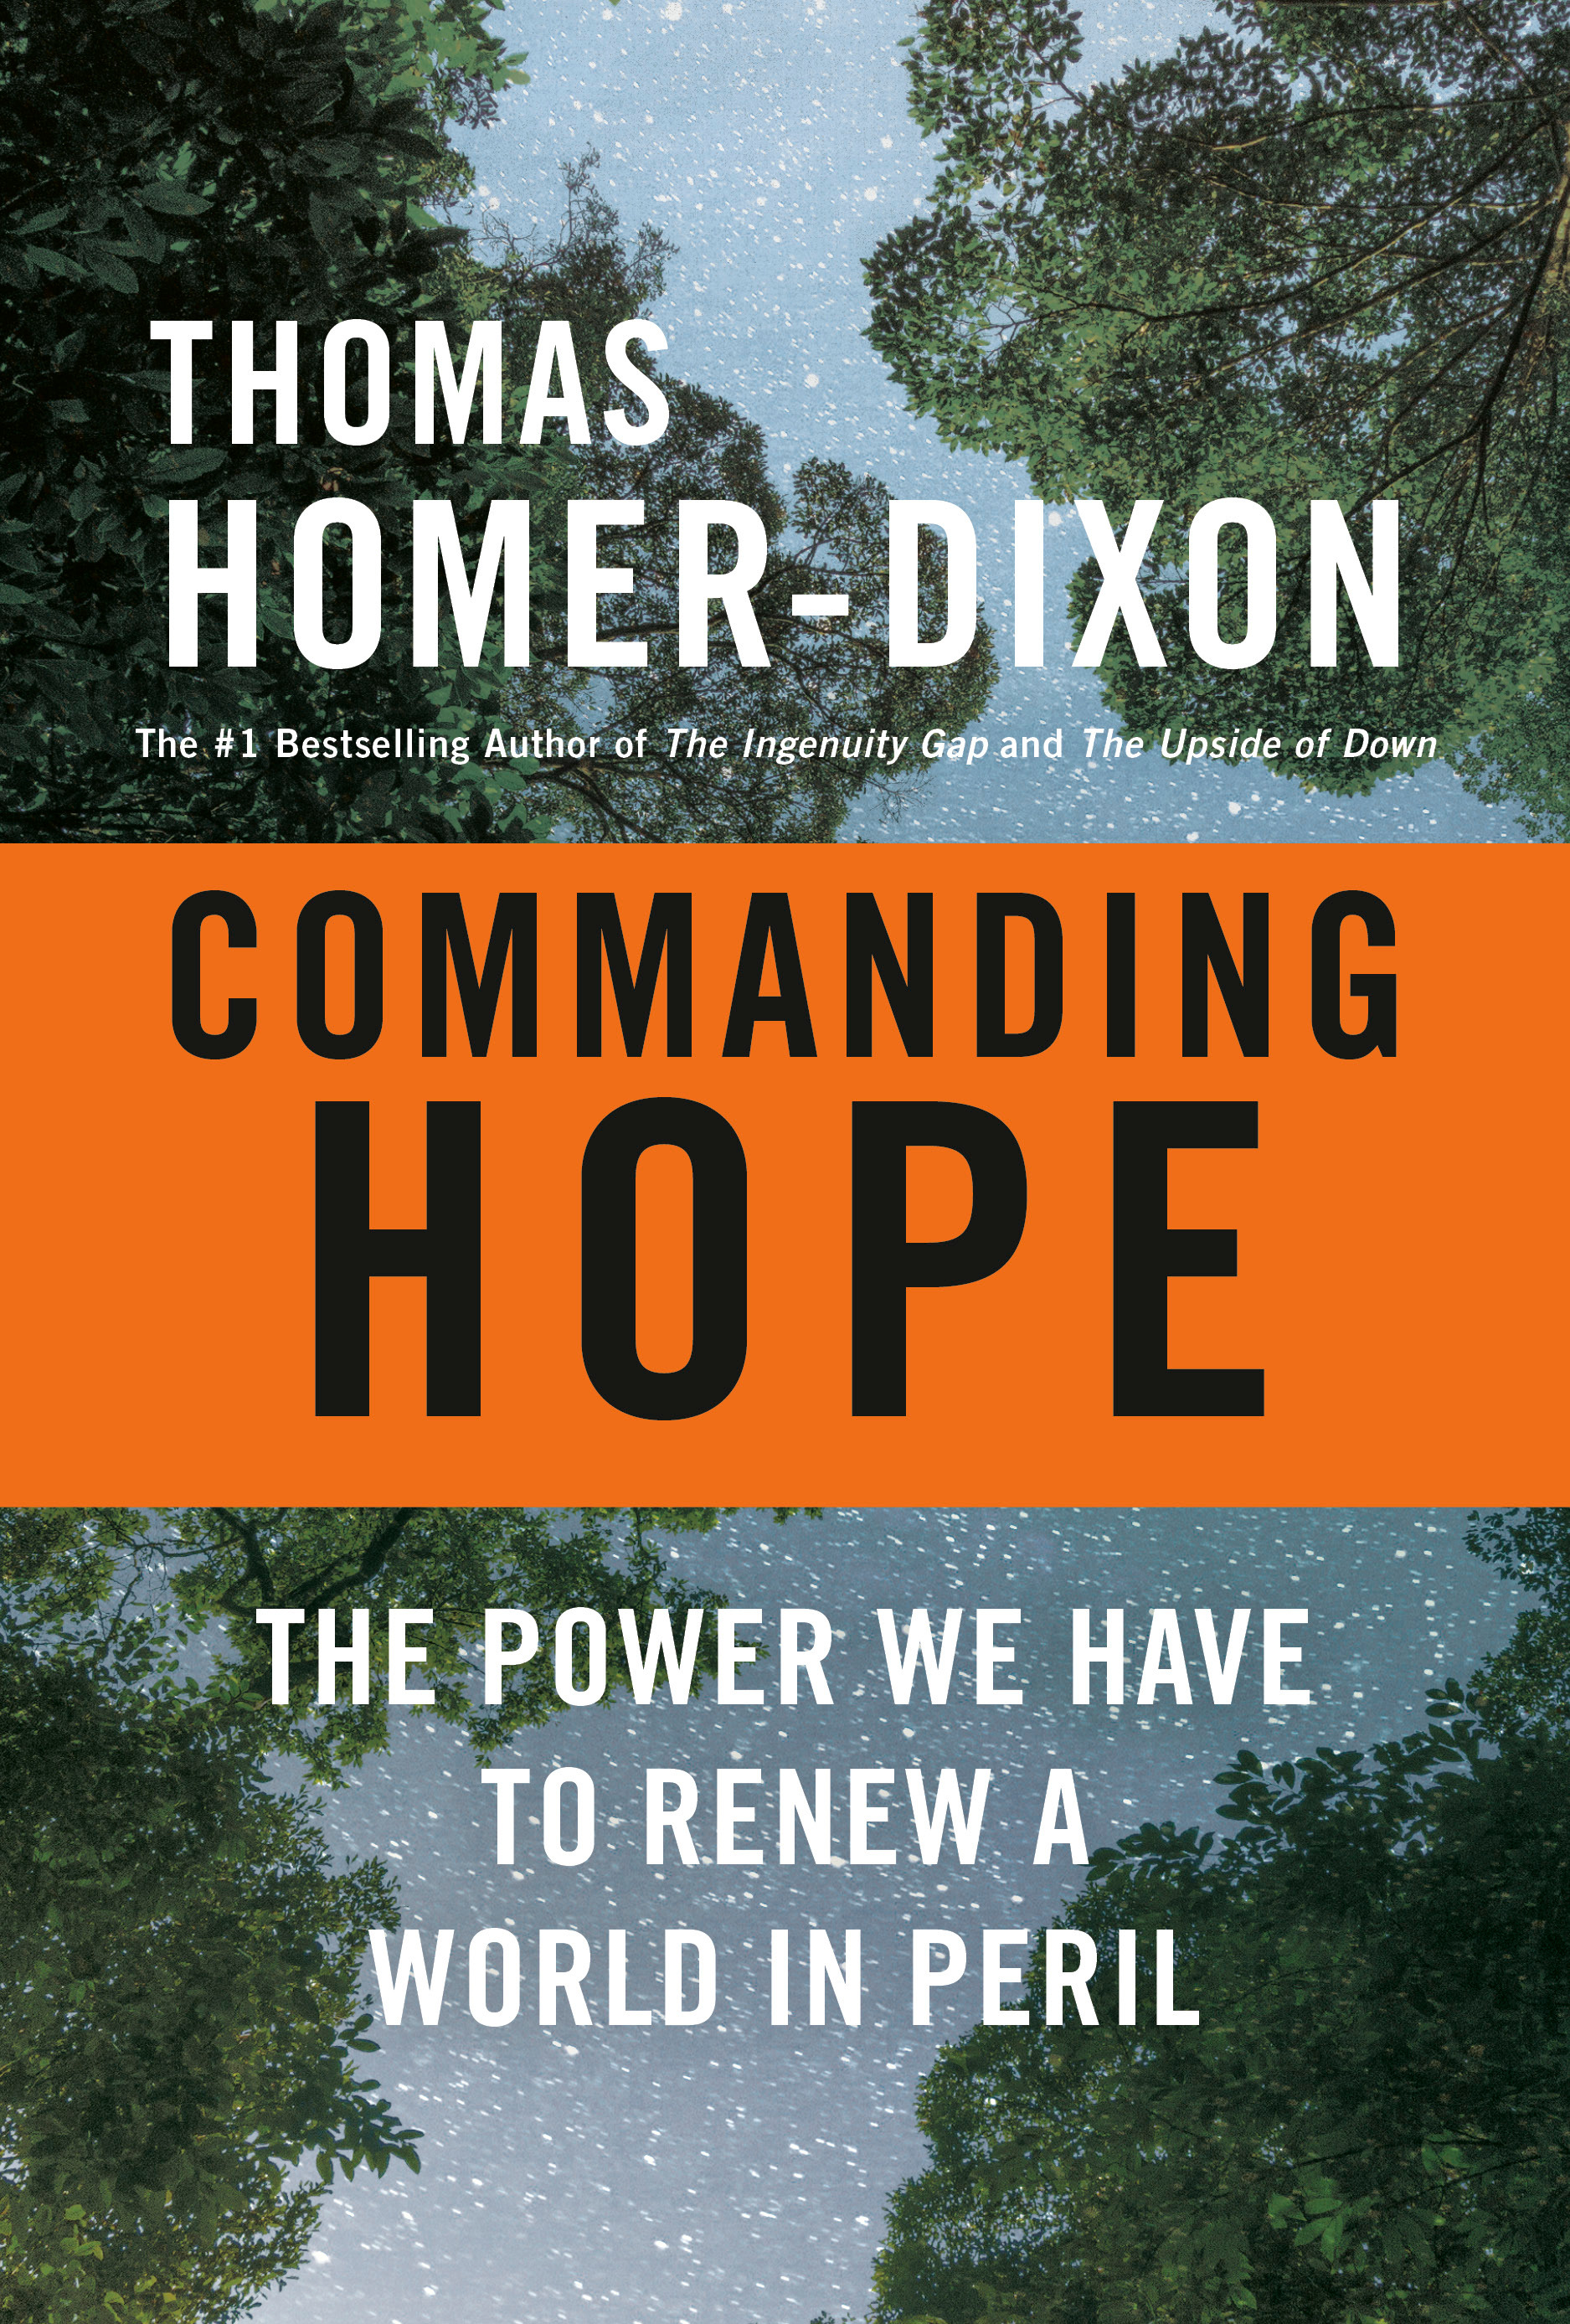 Commanding Hope : The Power We Have to Renew a World in Peril | Homer-Dixon, Thomas